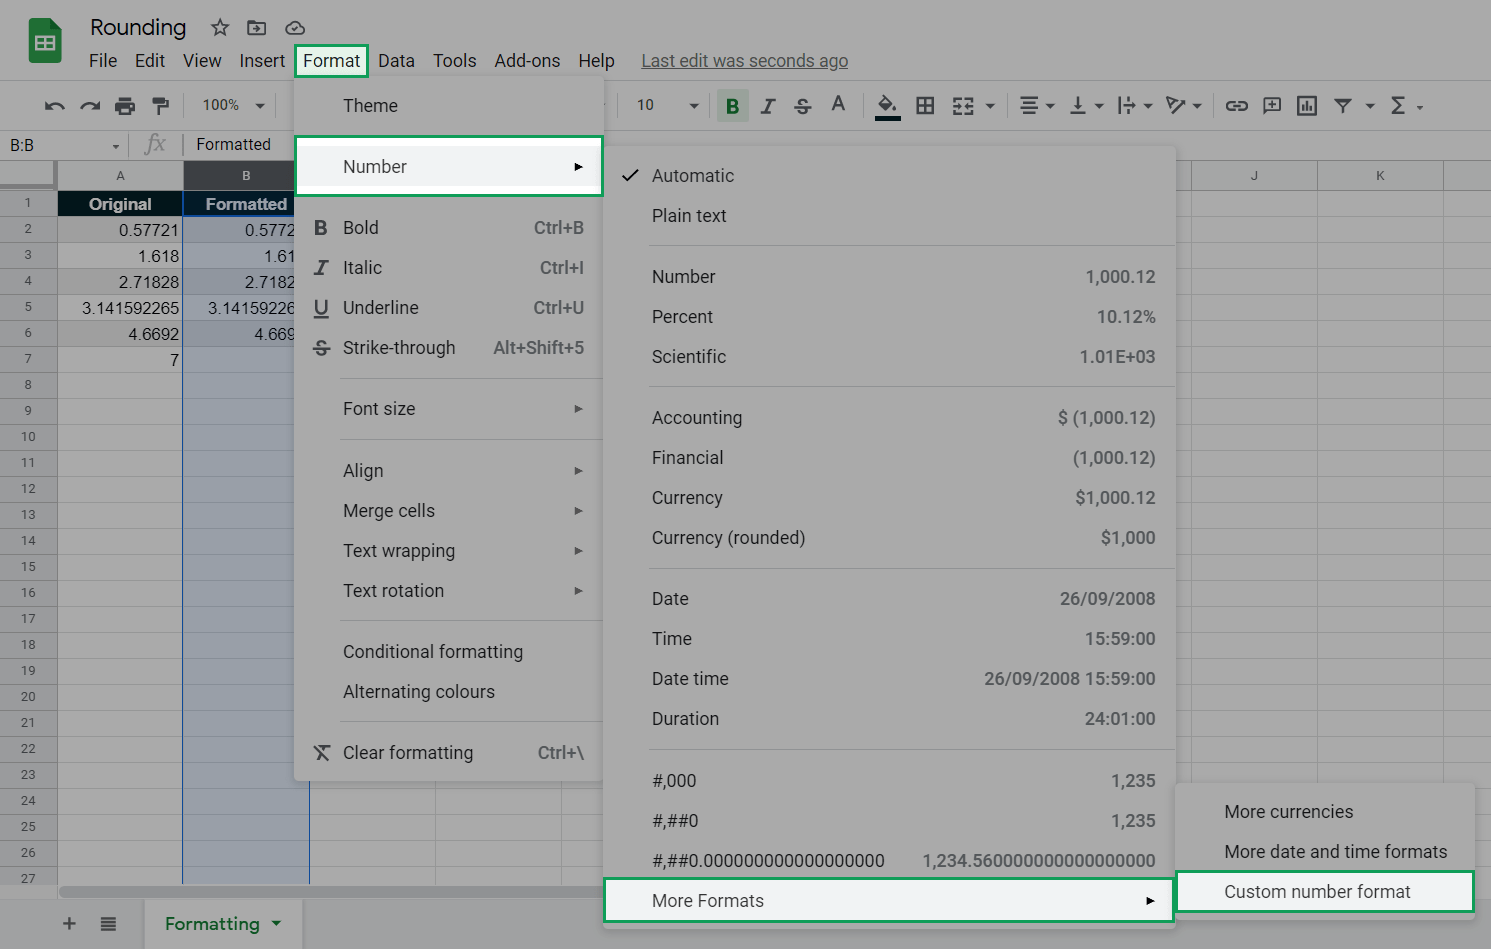 where to find the custom number format option using the google sheets format menu